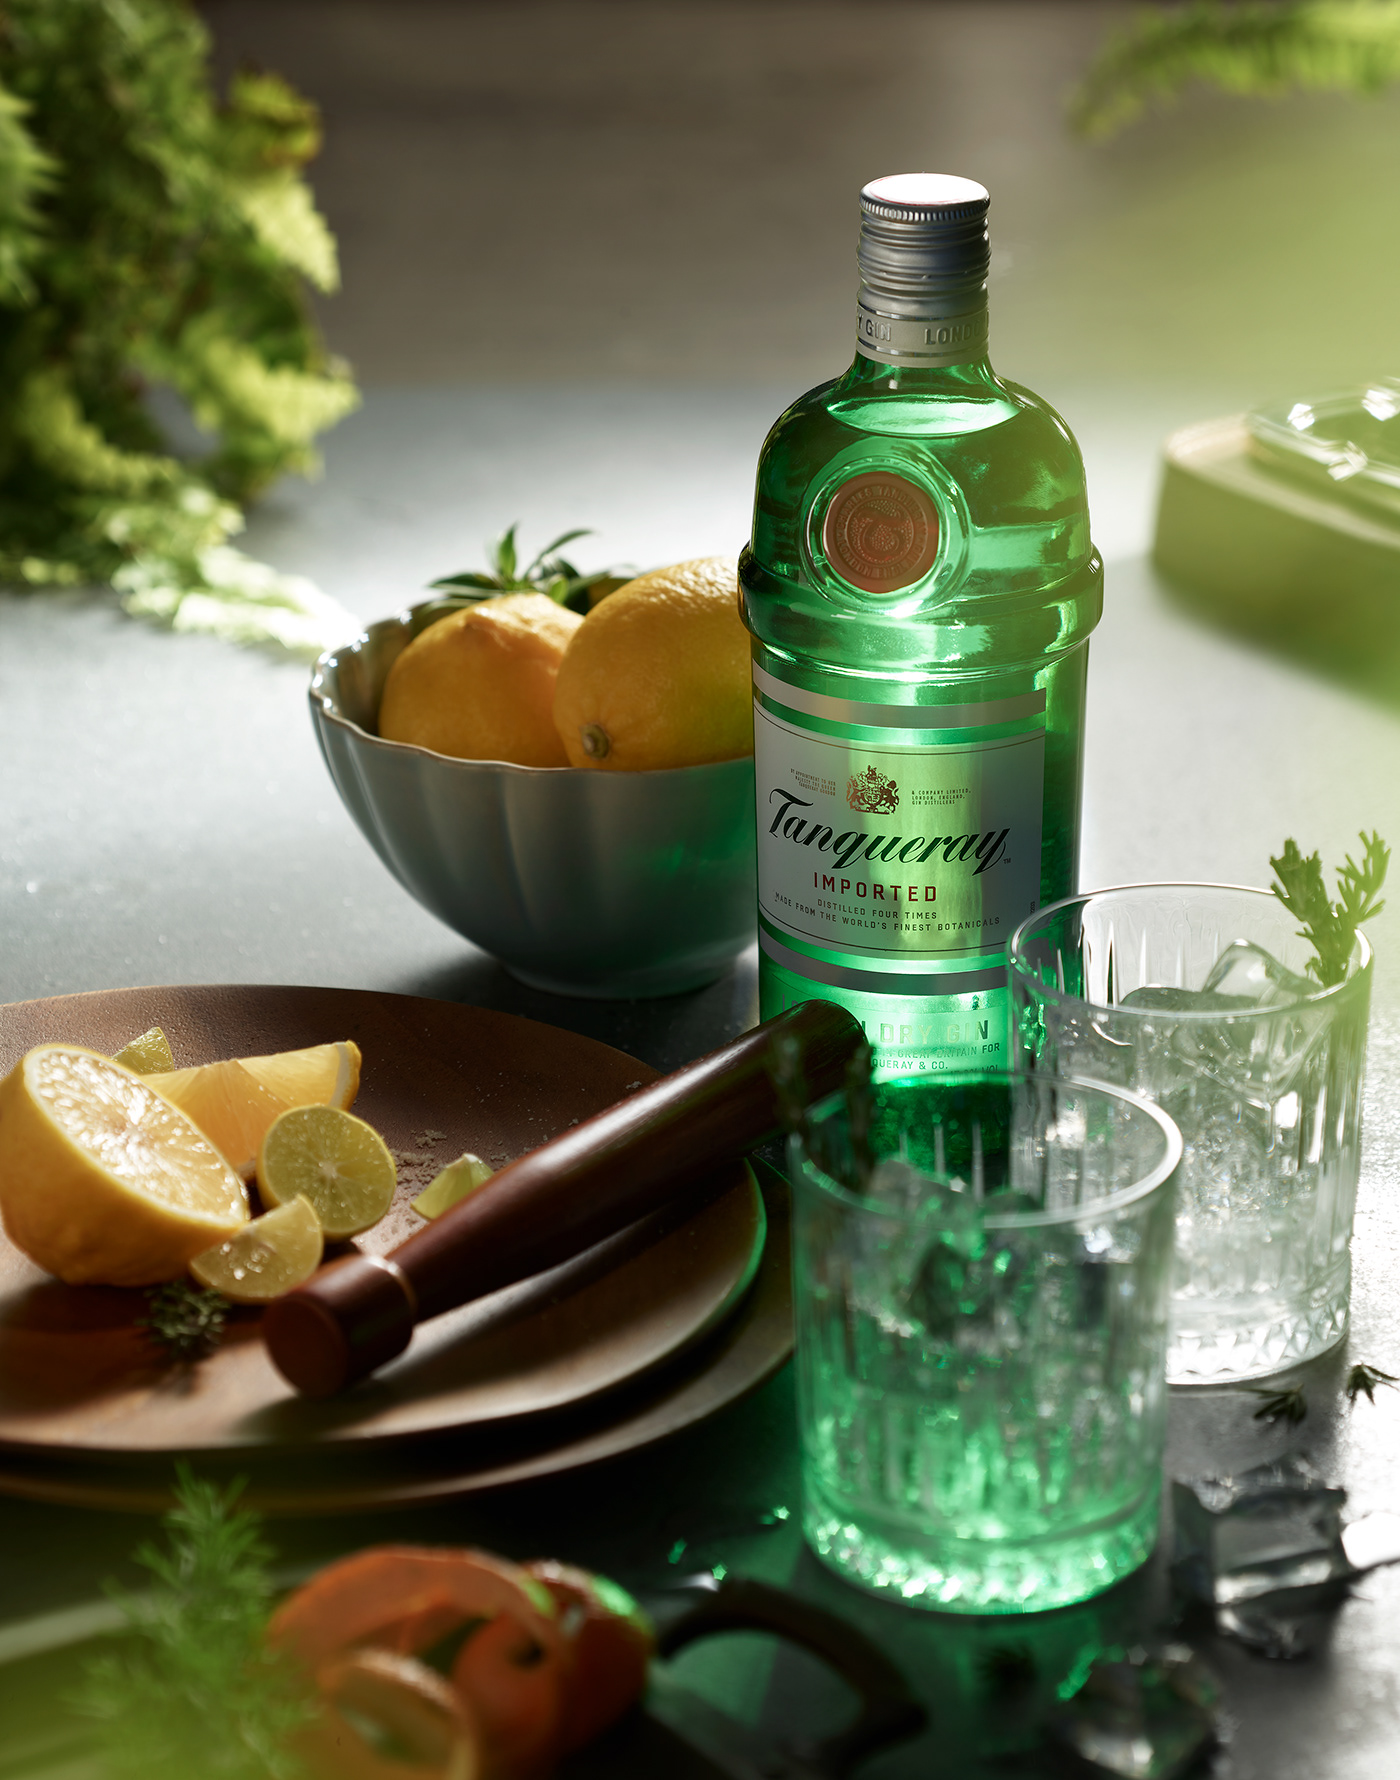 Ingredient inspired Product Photography for a Gin brand - Tanqueray